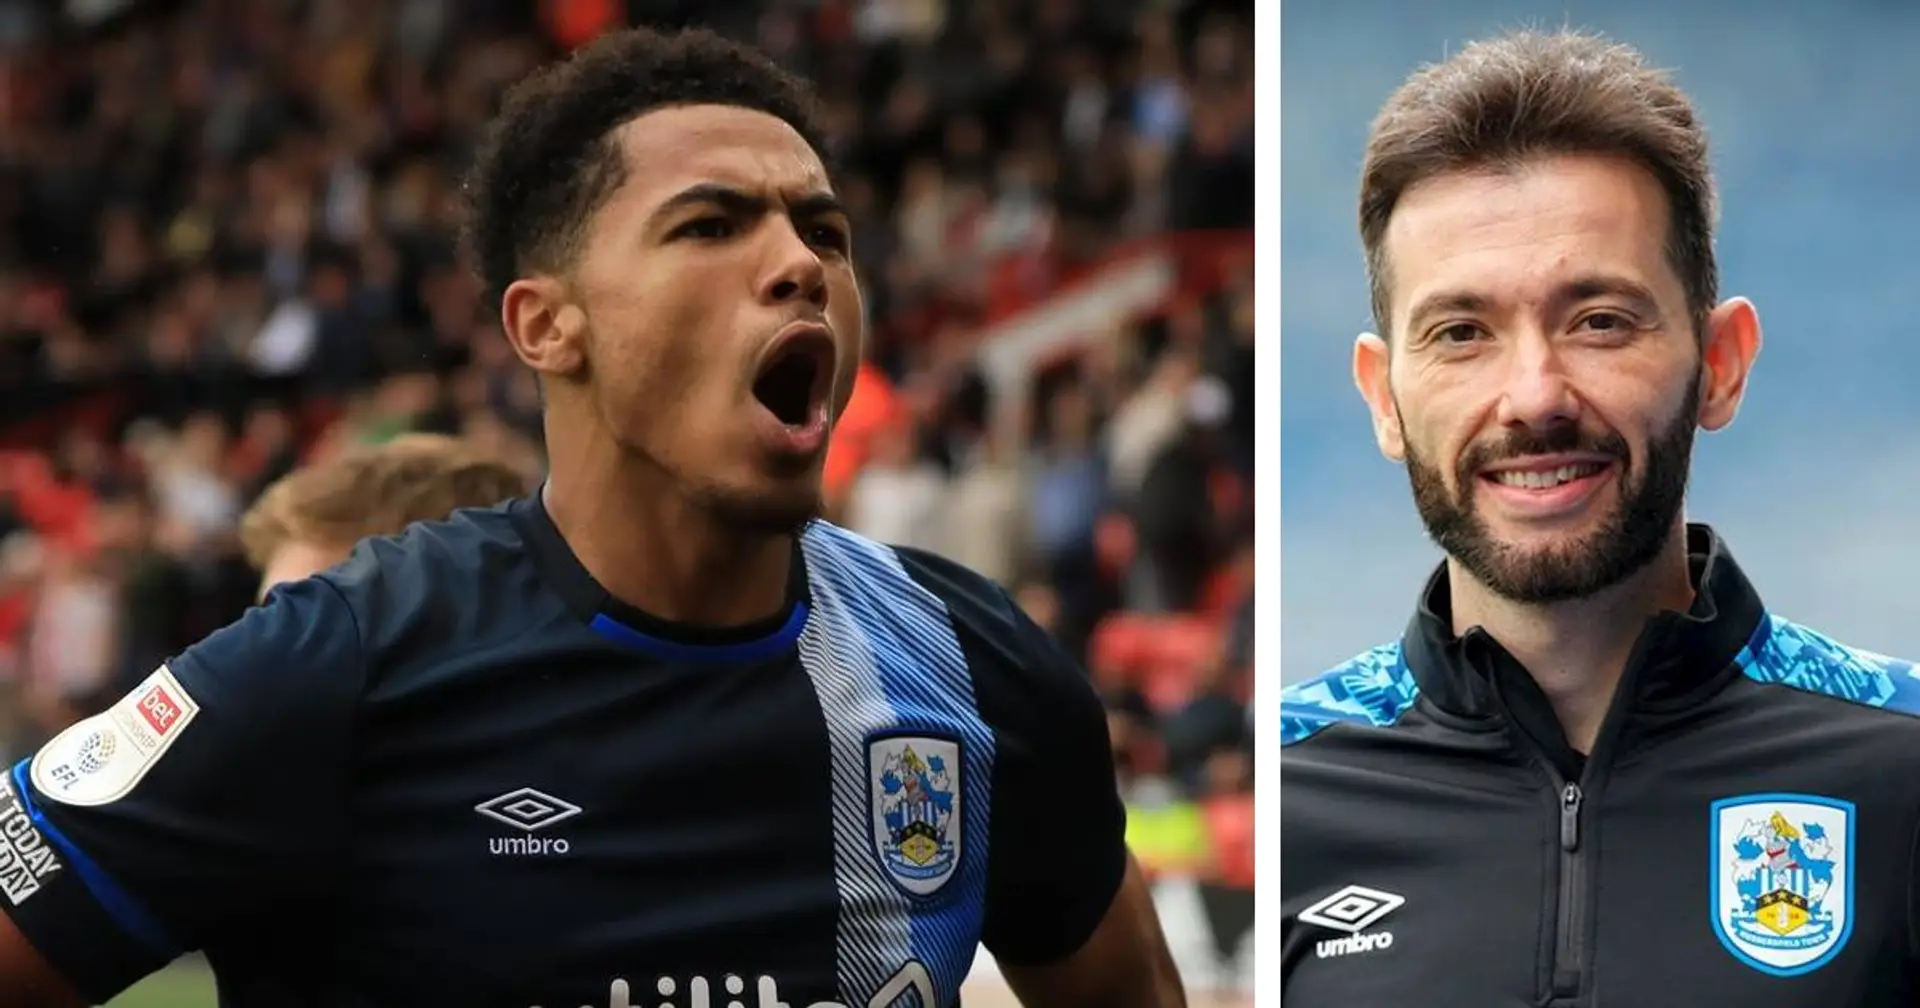 'Best I've seen at his age - he'll surely play for Chelsea': Loanee Colwill gets high praise from Huddersfield bosses